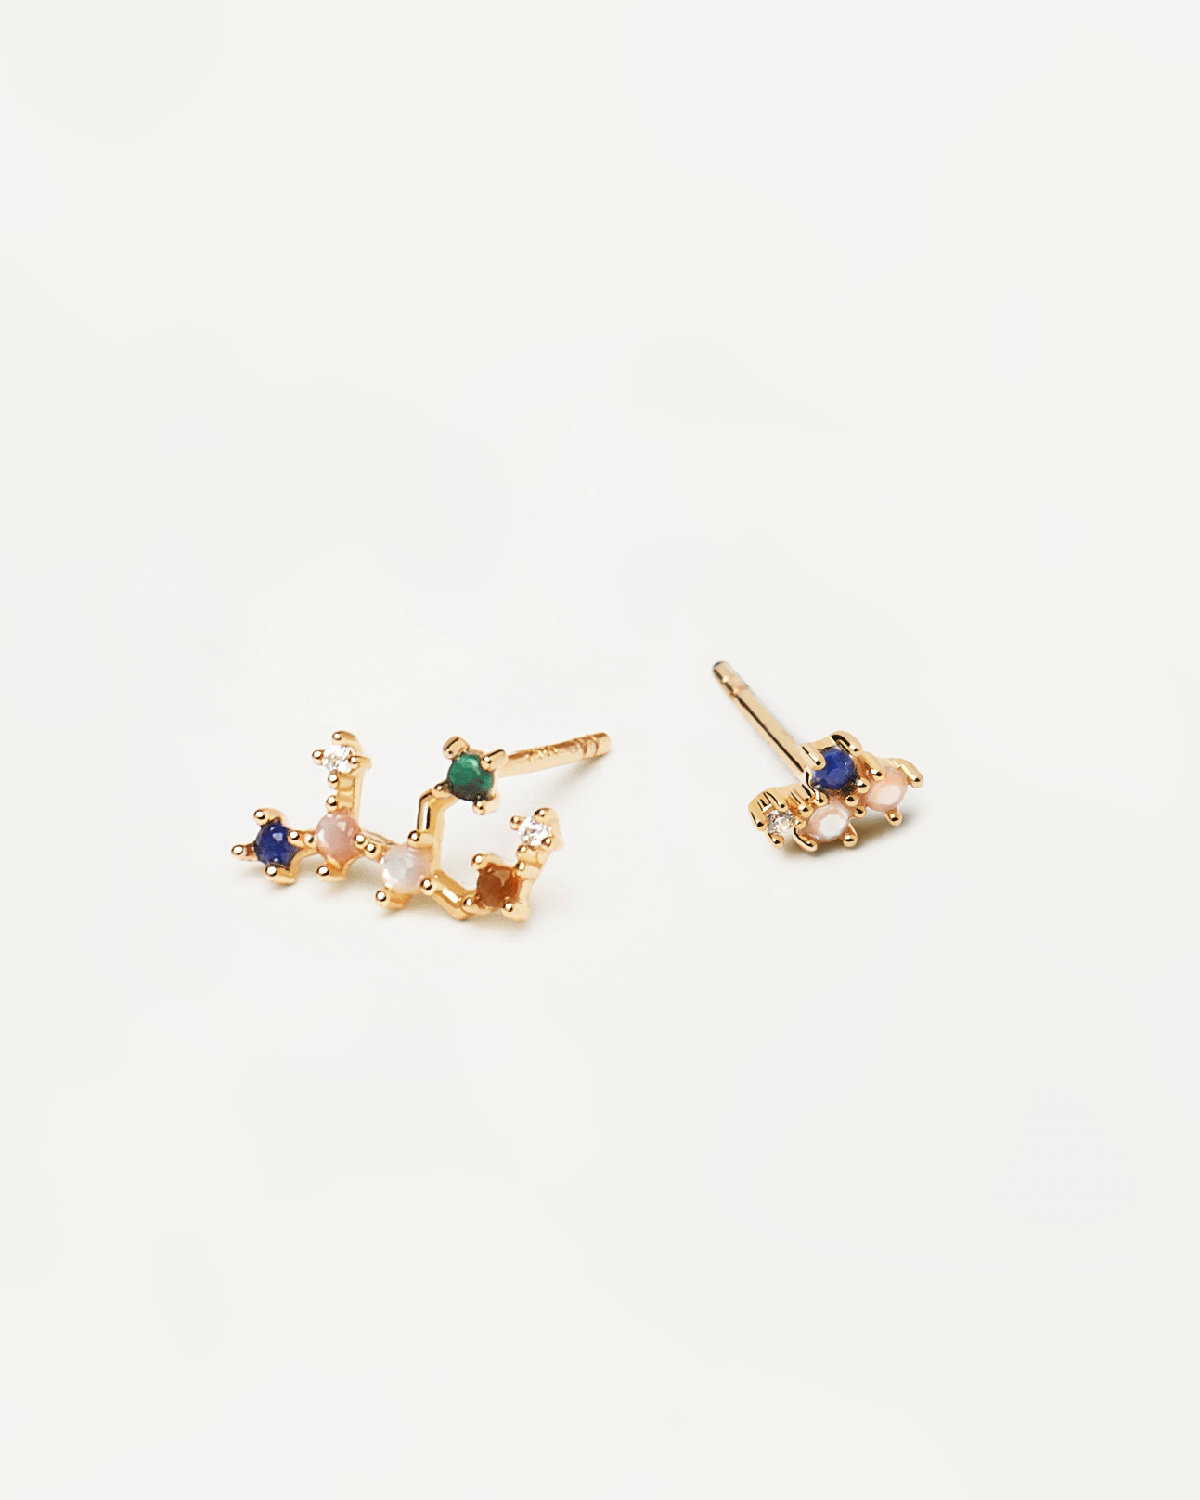 2021 Selection | Virgo Earrings. Get the latest arrival from PDPAOLA. Place your order safely and get this Best Seller. Free Shipping over 70€